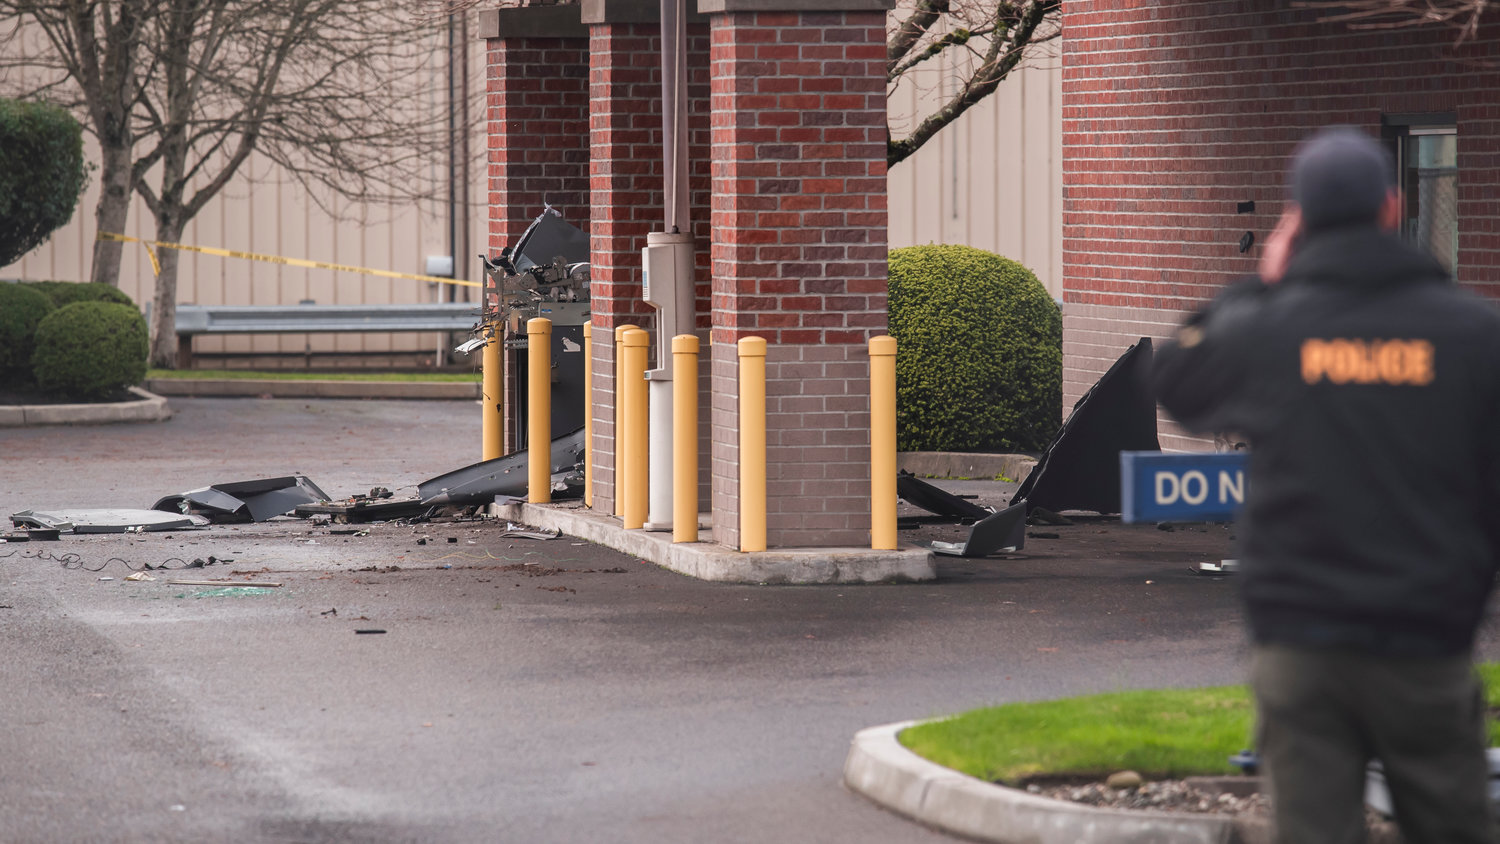 Debris are seen scattered in an area where an ATM once stood outside the 1st Security Bank in Centralia Sunday morning after reports of an explosion in the area.